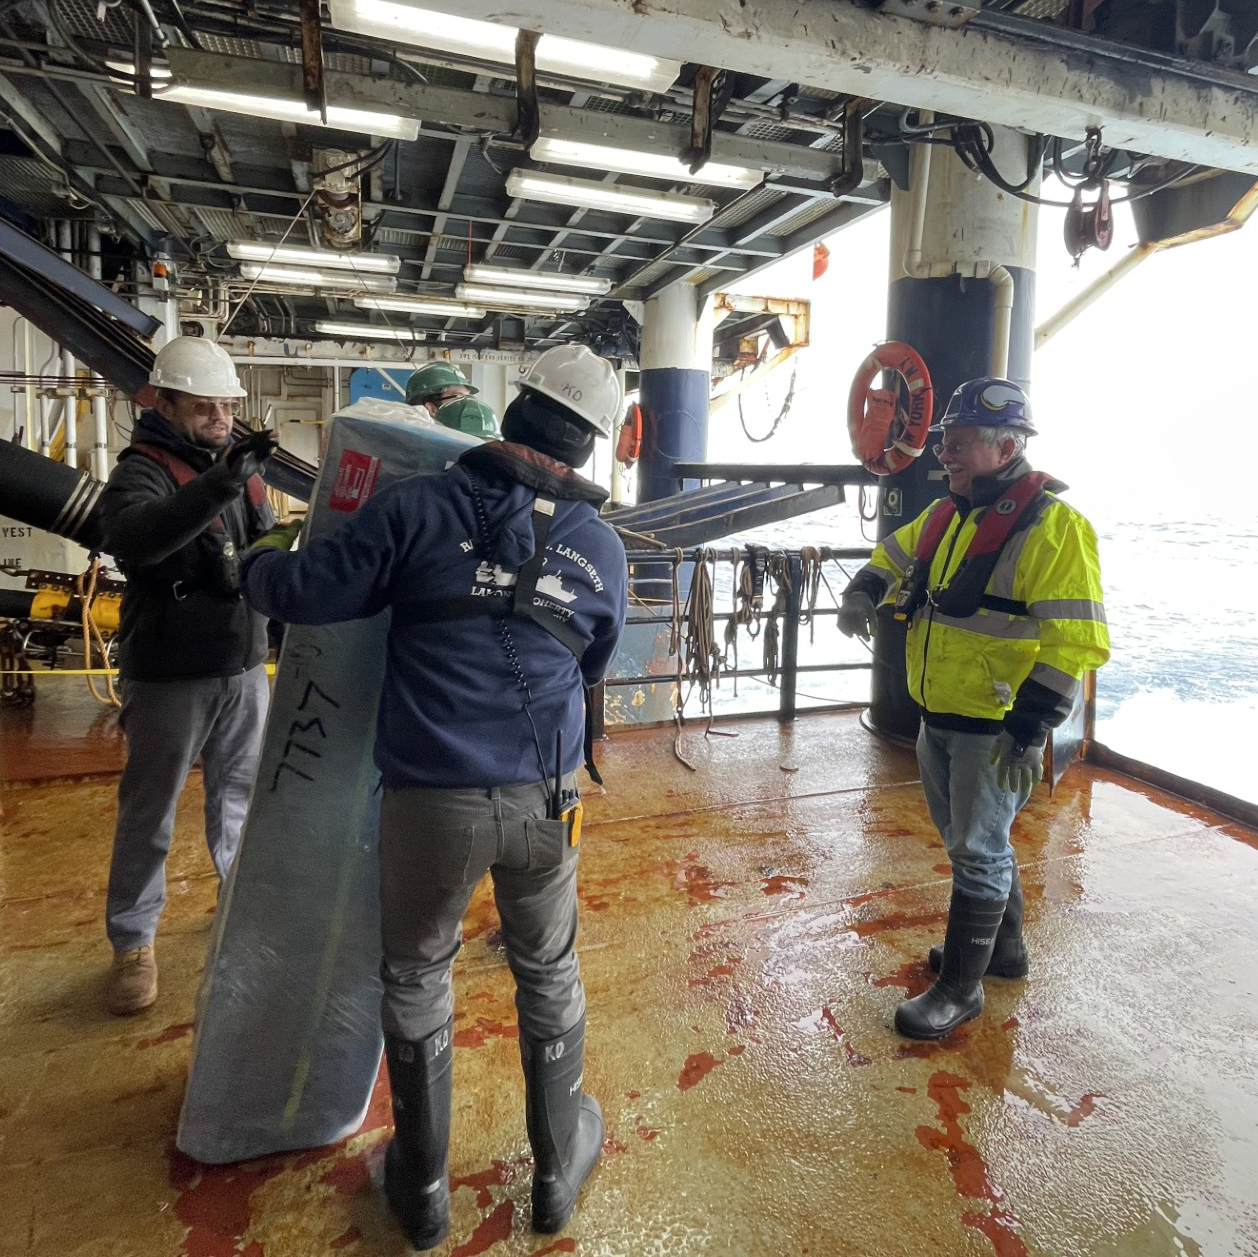 Koray Ergun, Lamont-Doherty Earth Observatory (LDEO) Marine Science Technician, Aaron Martin, and Todd Jensvold bring the Core Argo float to the stern of the Langseth.